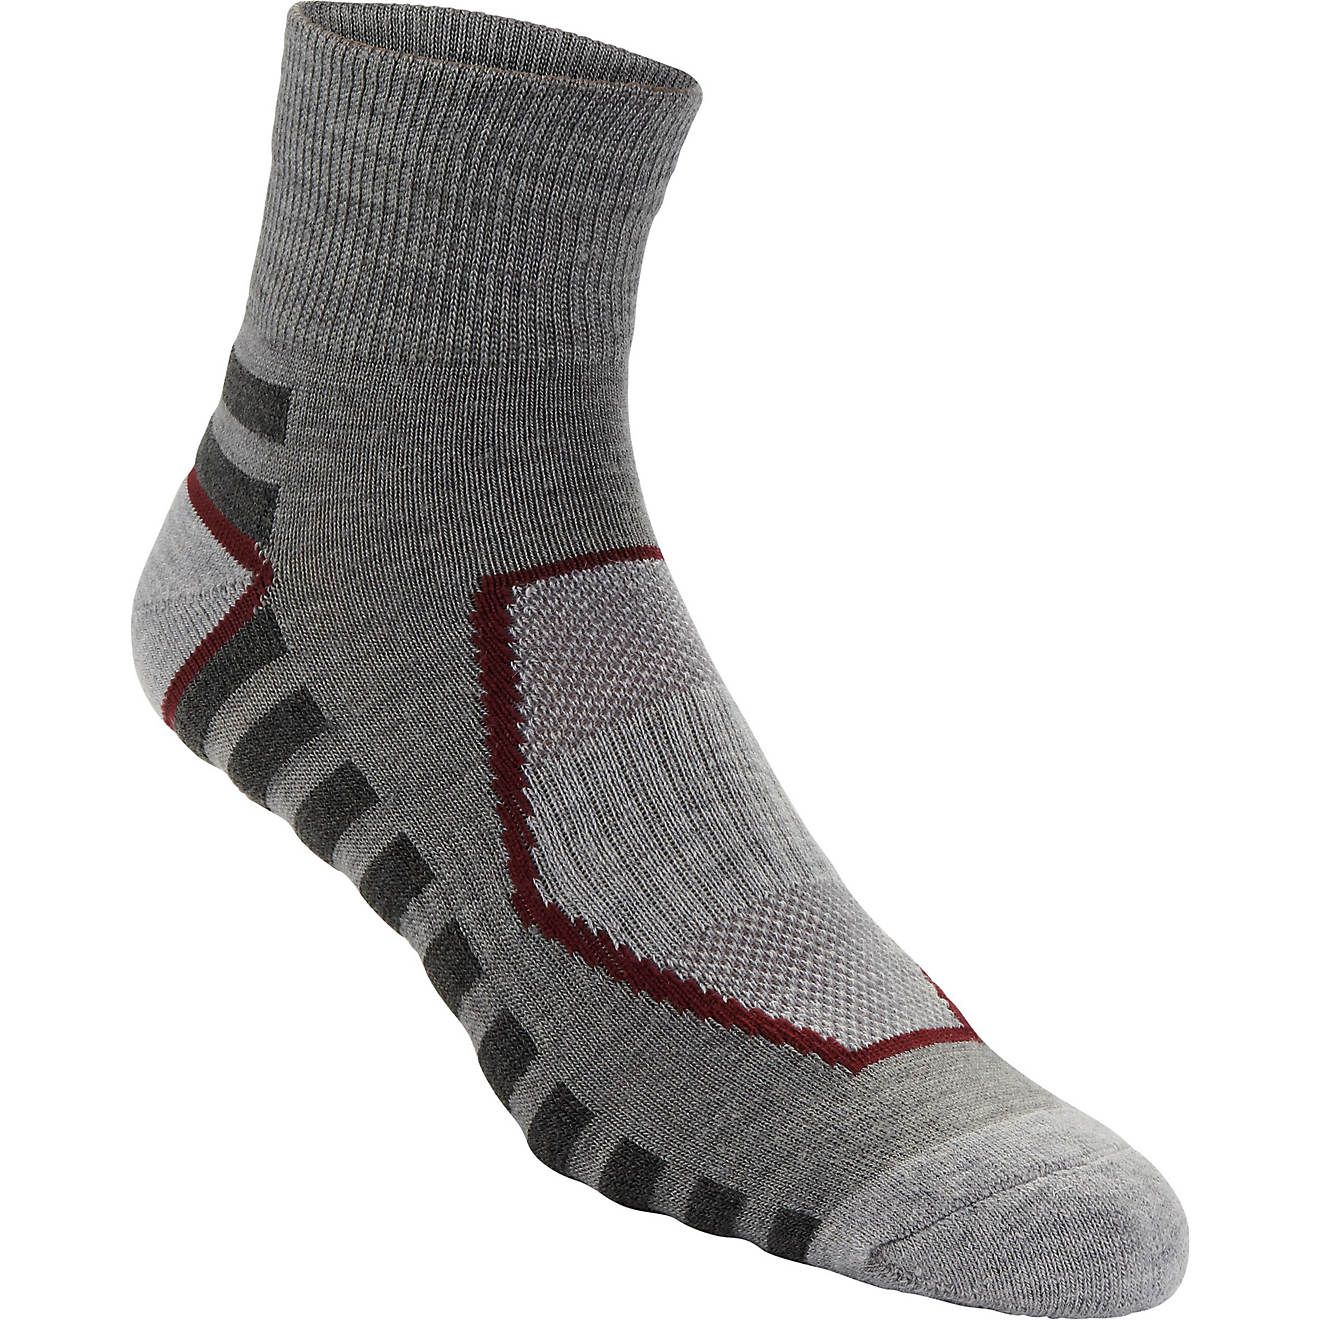 Magellan Outdoors Antifriction Hiking Quarter Socks 2 Pack | Academy Sports + Outdoor Affiliate